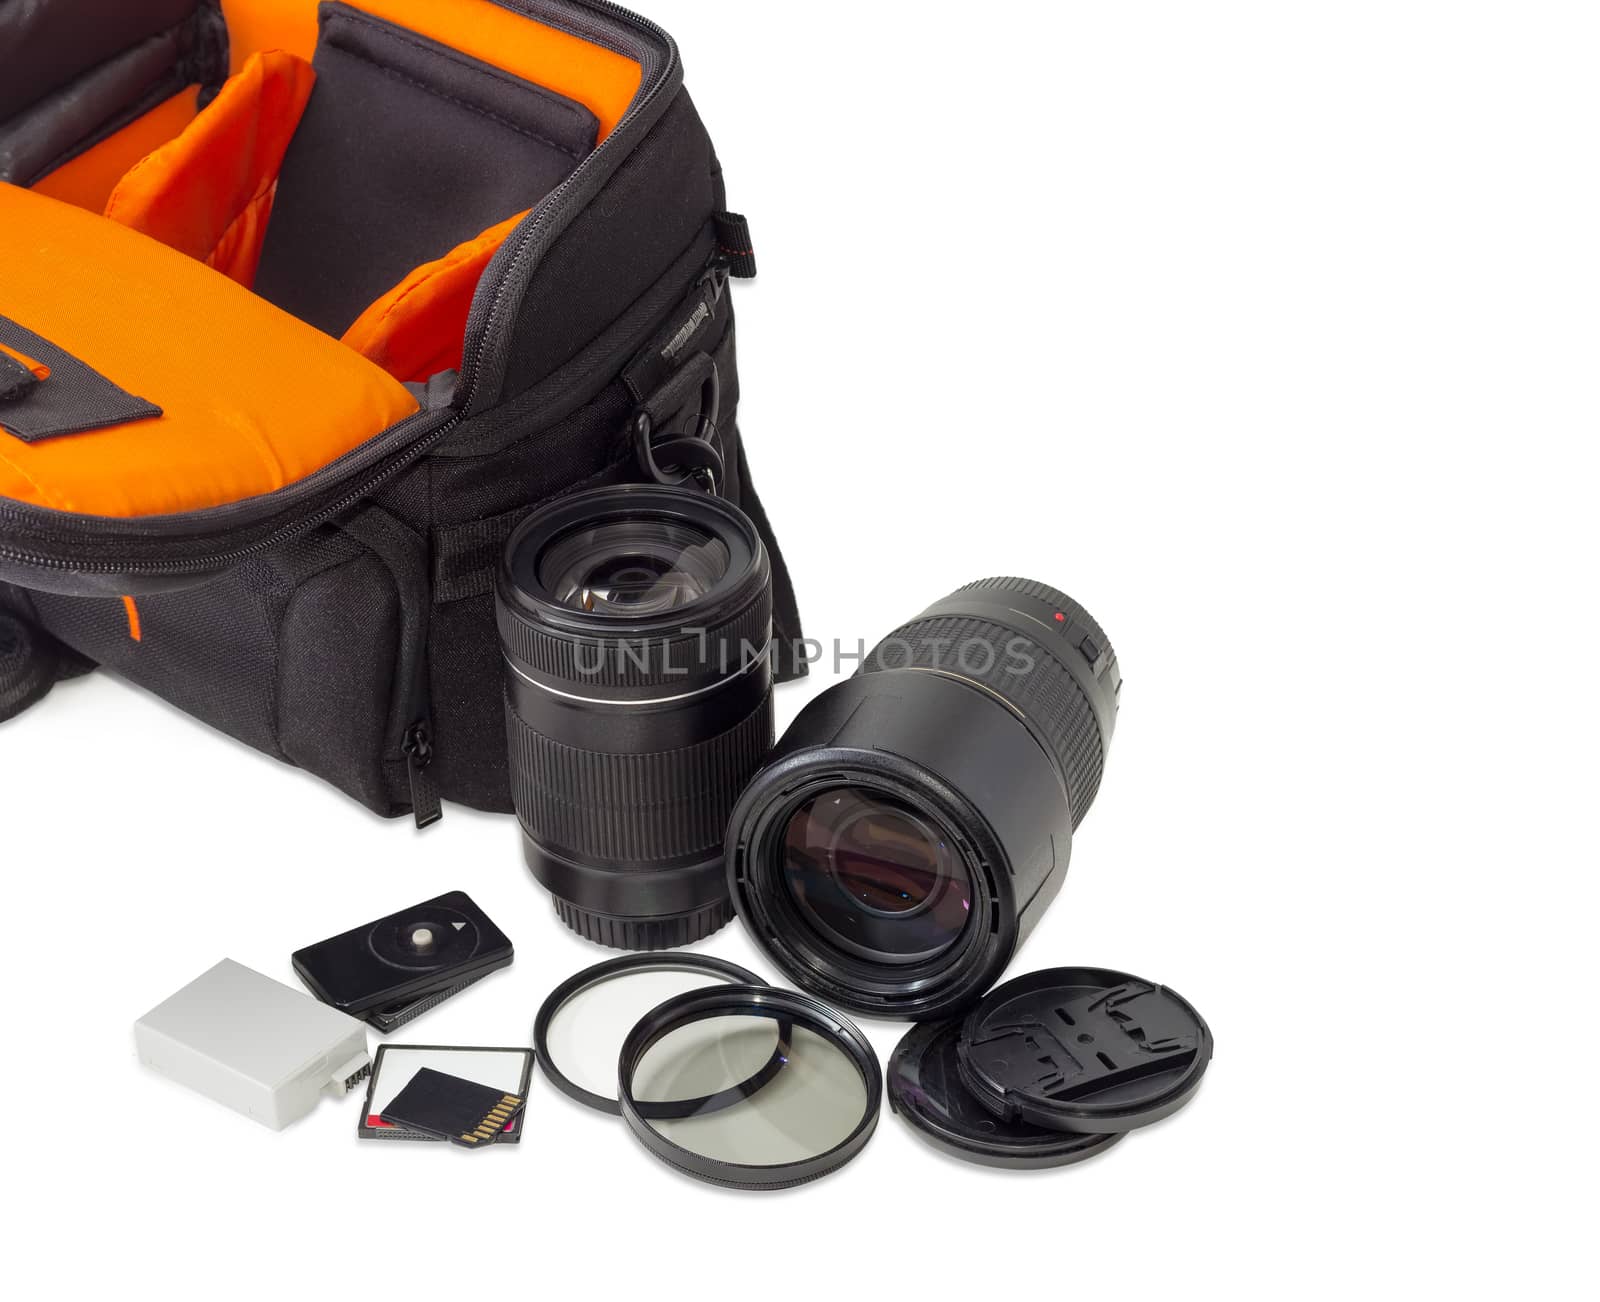 Two different photo lenses and some other photo accessories against the background of the fragment of the open camera bag on a light background
